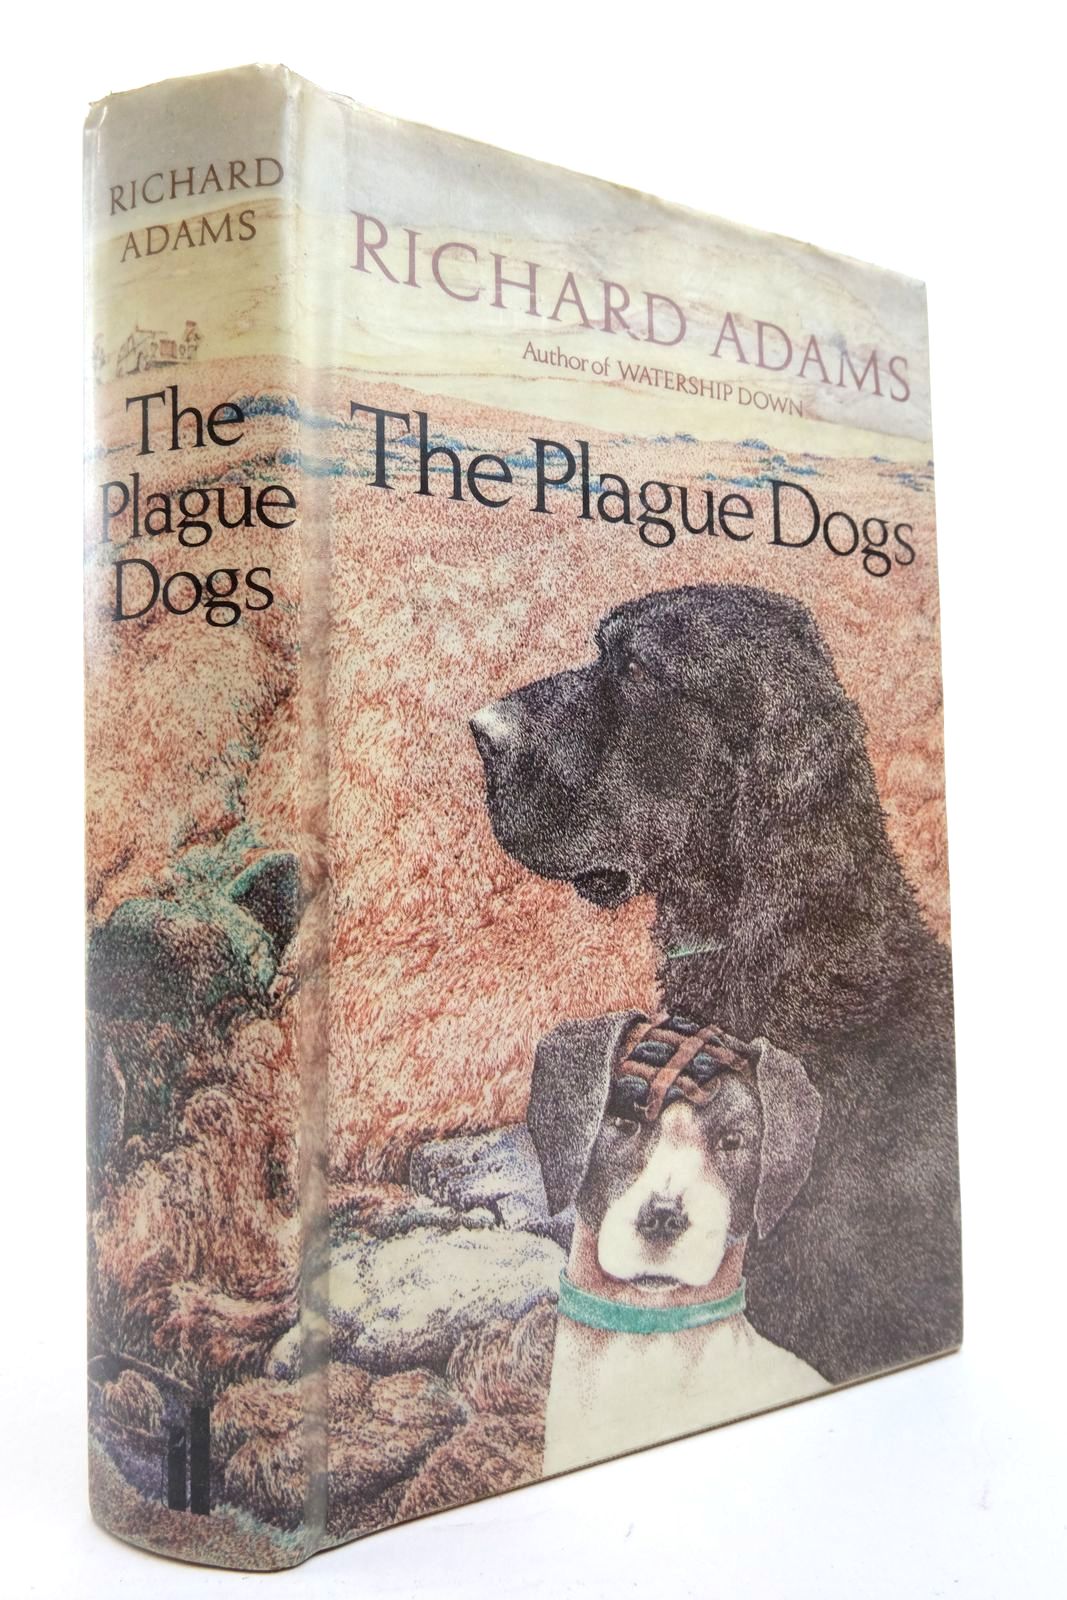 Photo of THE PLAGUE DOGS written by Adams, Richard illustrated by Wainwright, A. published by Allen Lane, Rex Collings (STOCK CODE: 2138017)  for sale by Stella & Rose's Books